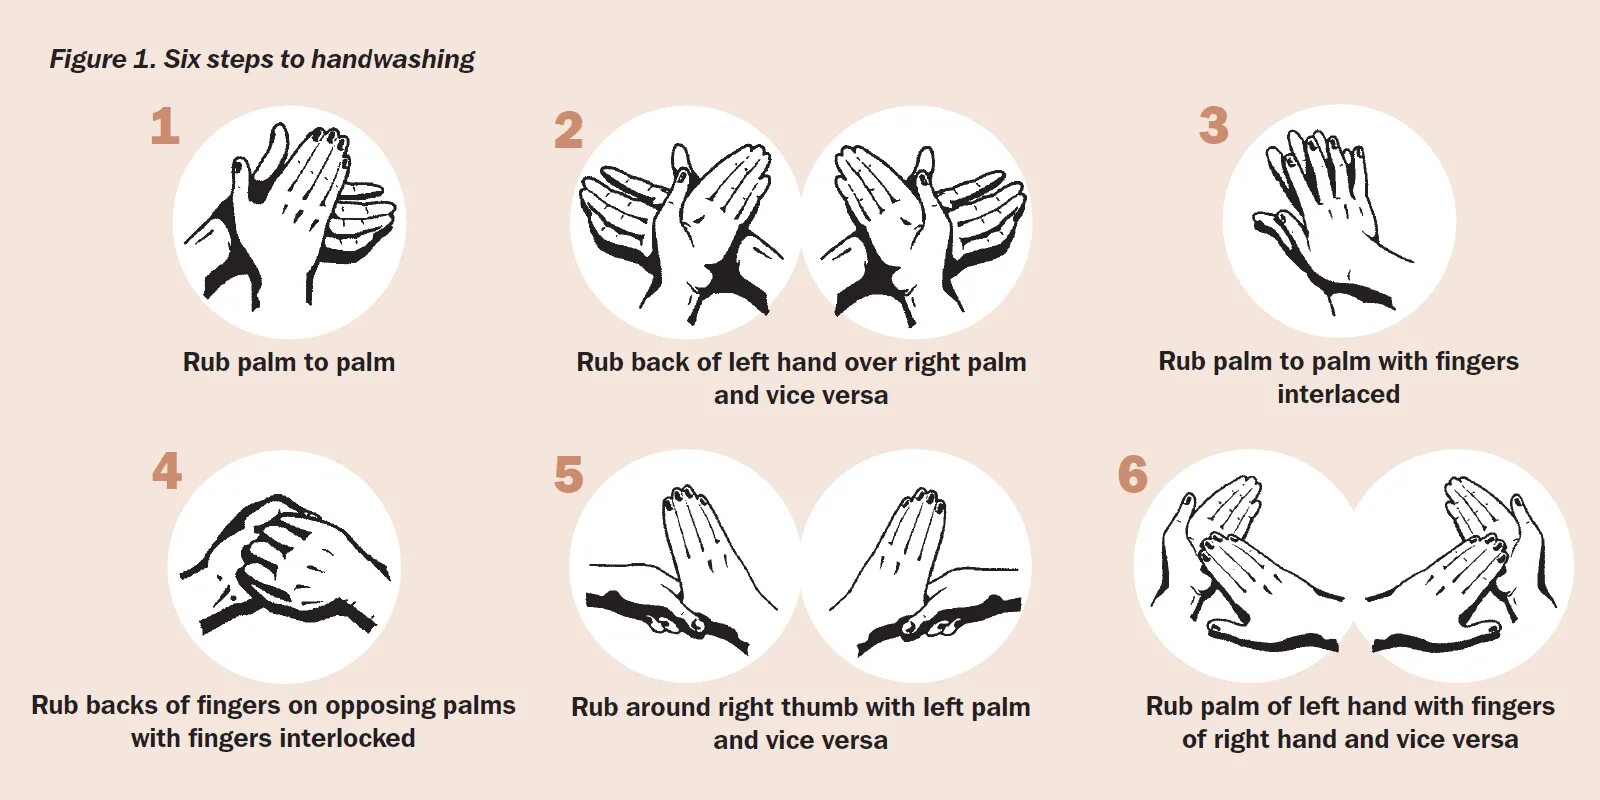 Have you washed your hands. Interlaced fingers. Разница hand и hand over. Hand Hygiene who. Massagem nas maos.